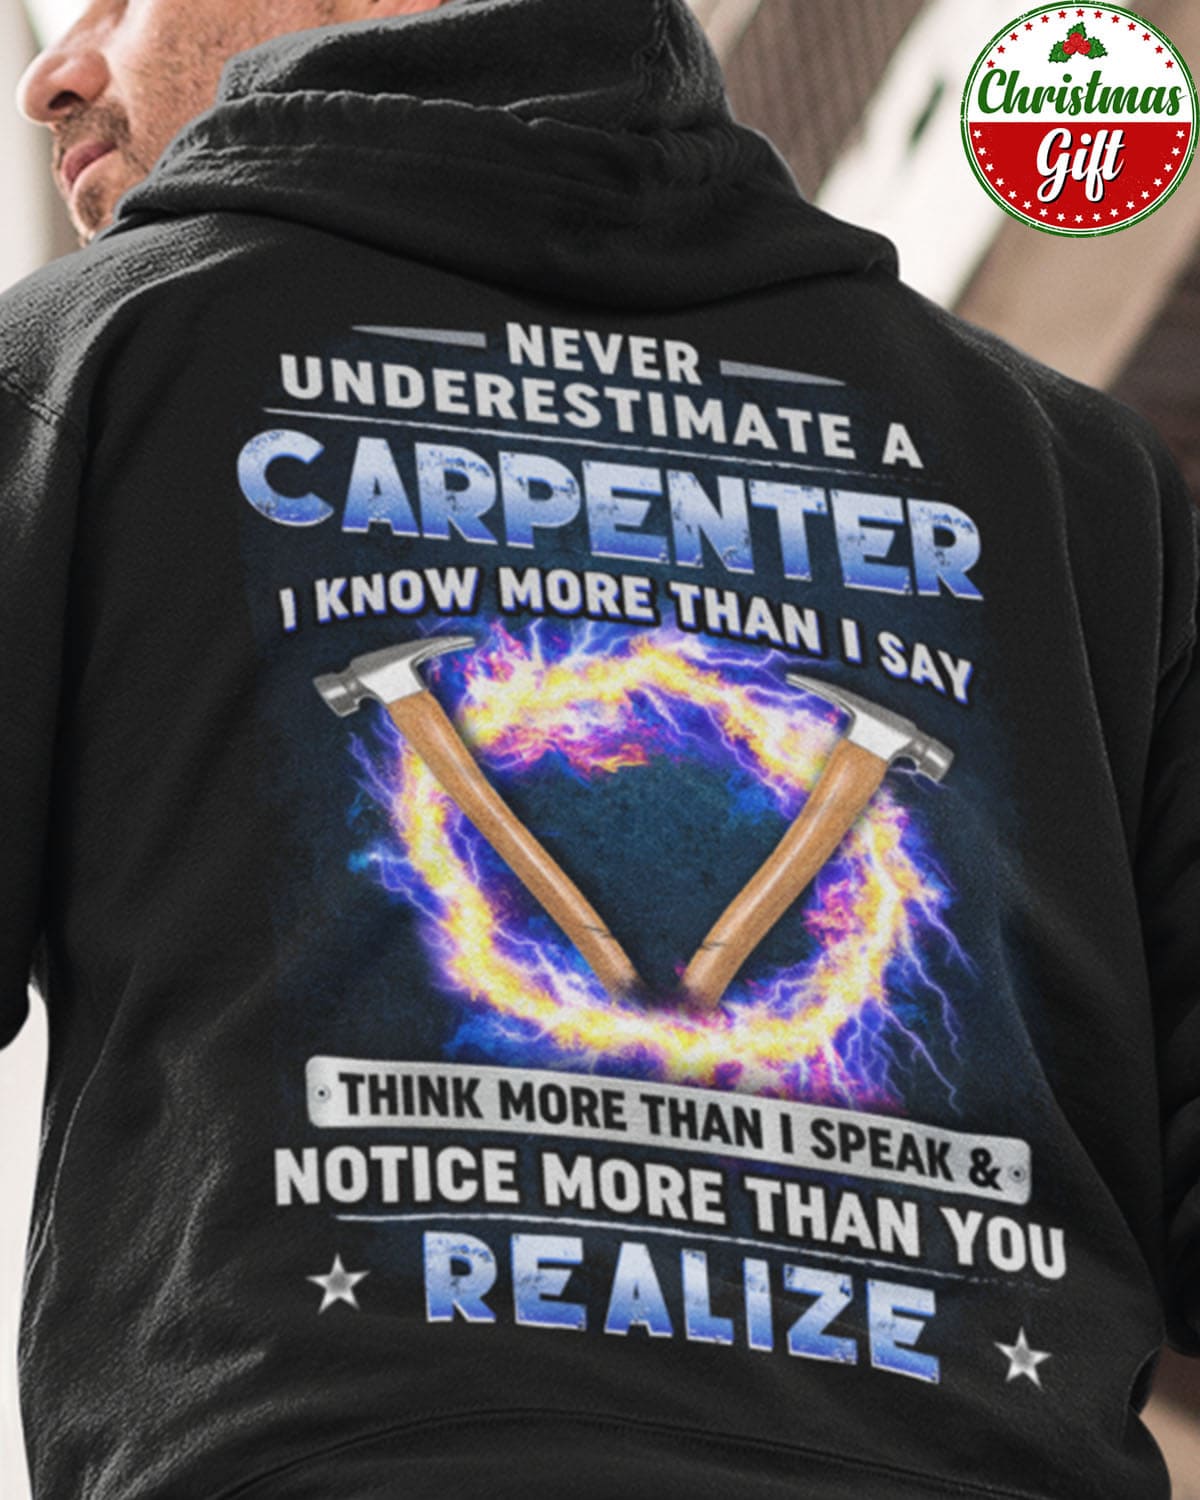 Never underestimate a carpenter I know more than I say - Carpenter tool graphic, gift for carpenter